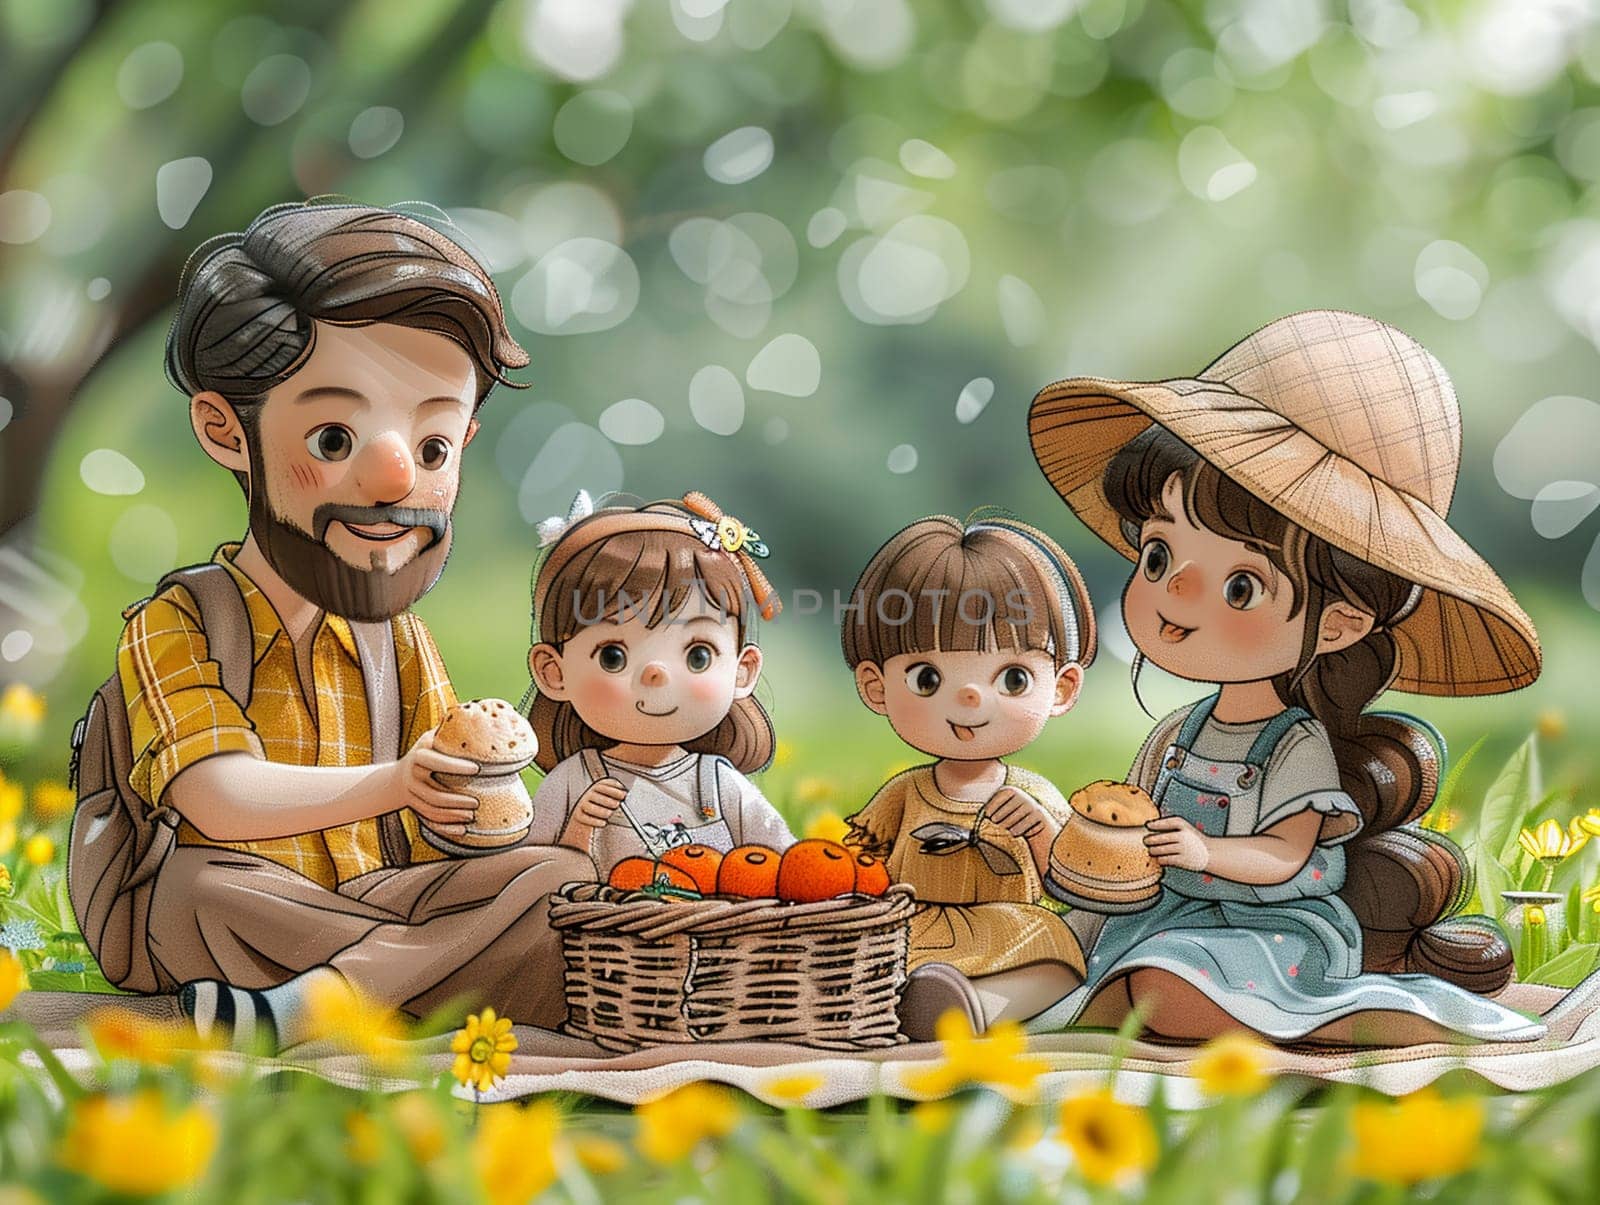 Cartoon family enjoying a picnic in the park, designed with bright colors and happy expressions.